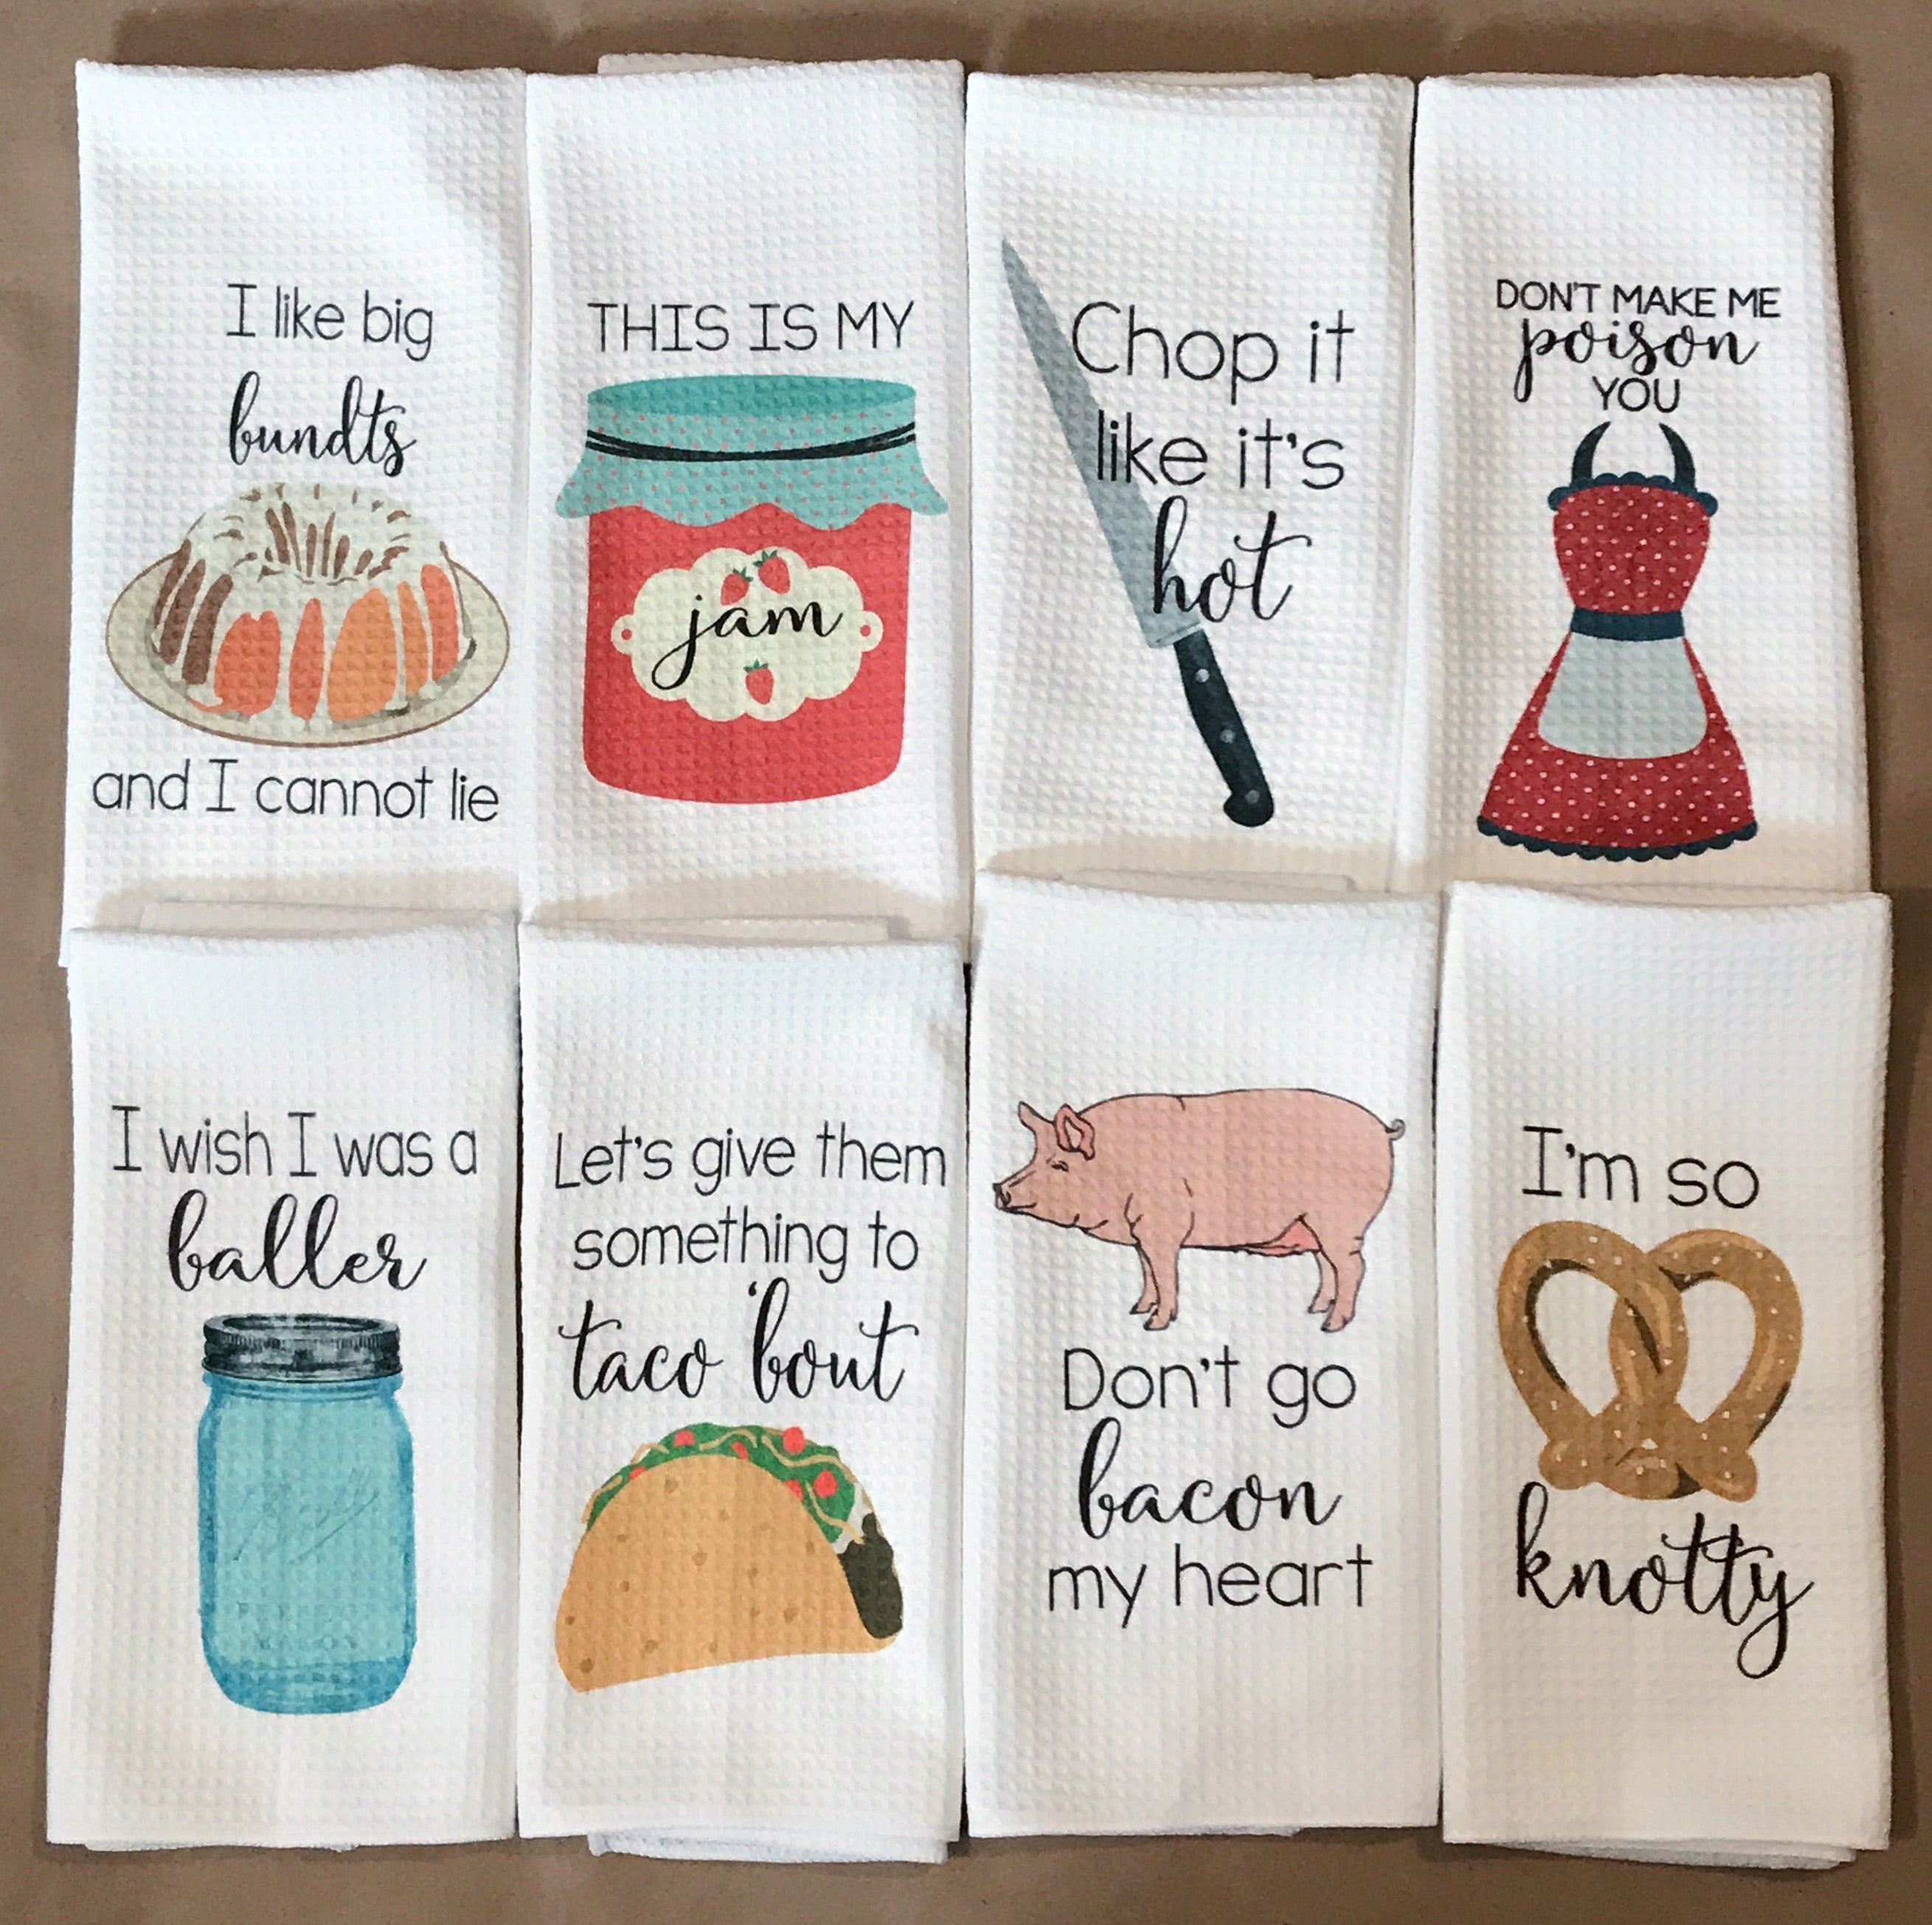 Baking Microfiber Towels Set of 4, Housewarming Gifts for New Home, Tea  Towels for Kitchen Funny, Mom Kitchen Gift, Wedding Kitchen, Funny Dish  Towels